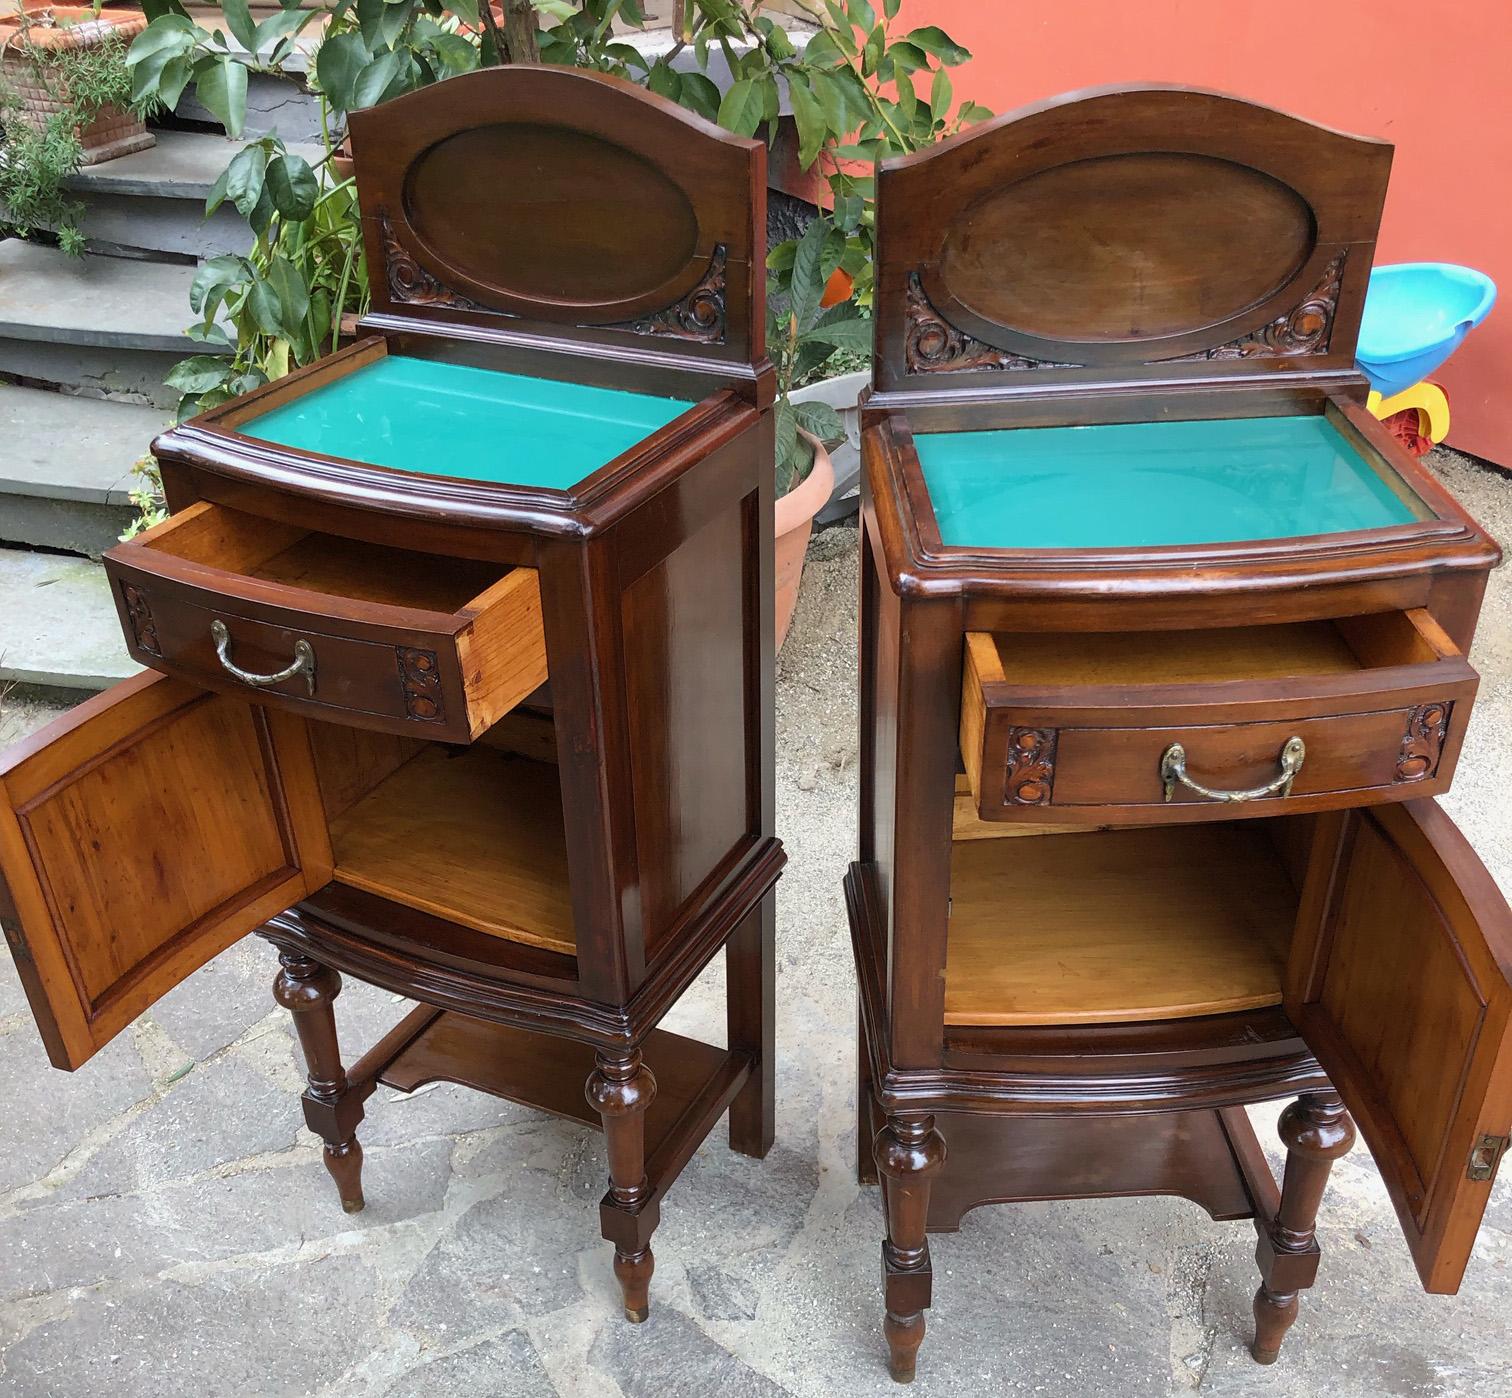 Pair of original Italian night stands with green glass tops, one right and one left.
The backsplash can be easily removed.
They are in solid walnut and fir
The height without backsplash is 86 cm.
Very elegant.
If you prefer, I can replace the